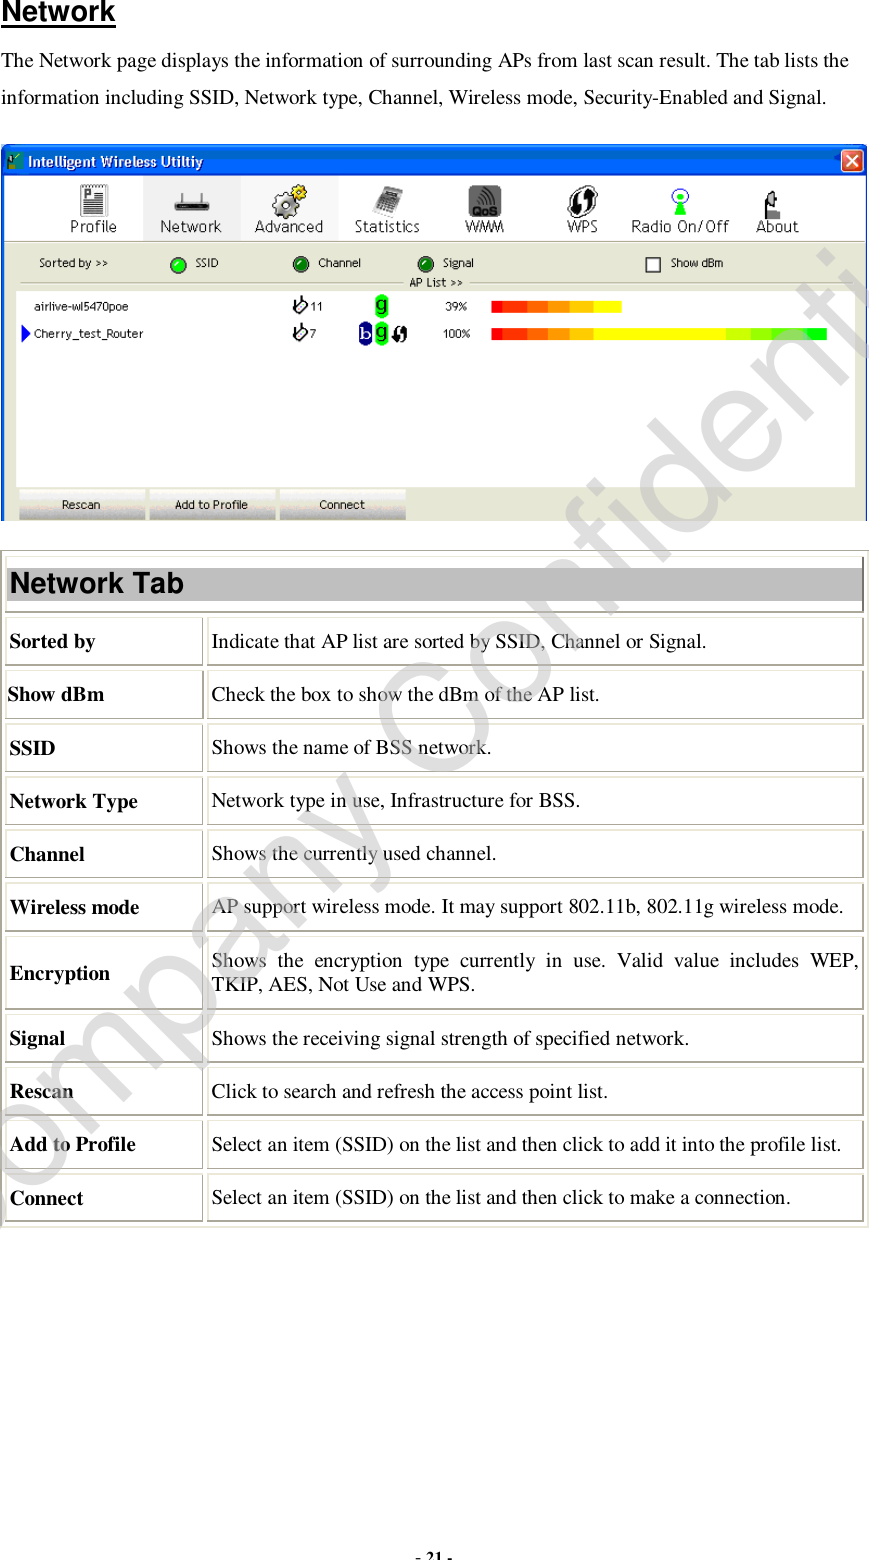  - 21 - Network The Network page displays the information of surrounding APs from last scan result. The tab lists the information including SSID, Network type, Channel, Wireless mode, Security-Enabled and Signal.  Network Tab Sorted by Indicate that AP list are sorted by SSID, Channel or Signal. Show dBm  Check the box to show the dBm of the AP list. SSID  Shows the name of BSS network. Network Type Network type in use, Infrastructure for BSS. Channel  Shows the currently used channel. Wireless mode  AP support wireless mode. It may support 802.11b, 802.11g wireless mode. Encryption  Shows the encryption type currently in use. Valid value includes WEP, TKIP, AES, Not Use and WPS. Signal  Shows the receiving signal strength of specified network. Rescan  Click to search and refresh the access point list. Add to Profile  Select an item (SSID) on the list and then click to add it into the profile list. Connect  Select an item (SSID) on the list and then click to make a connection.   Company Confidential